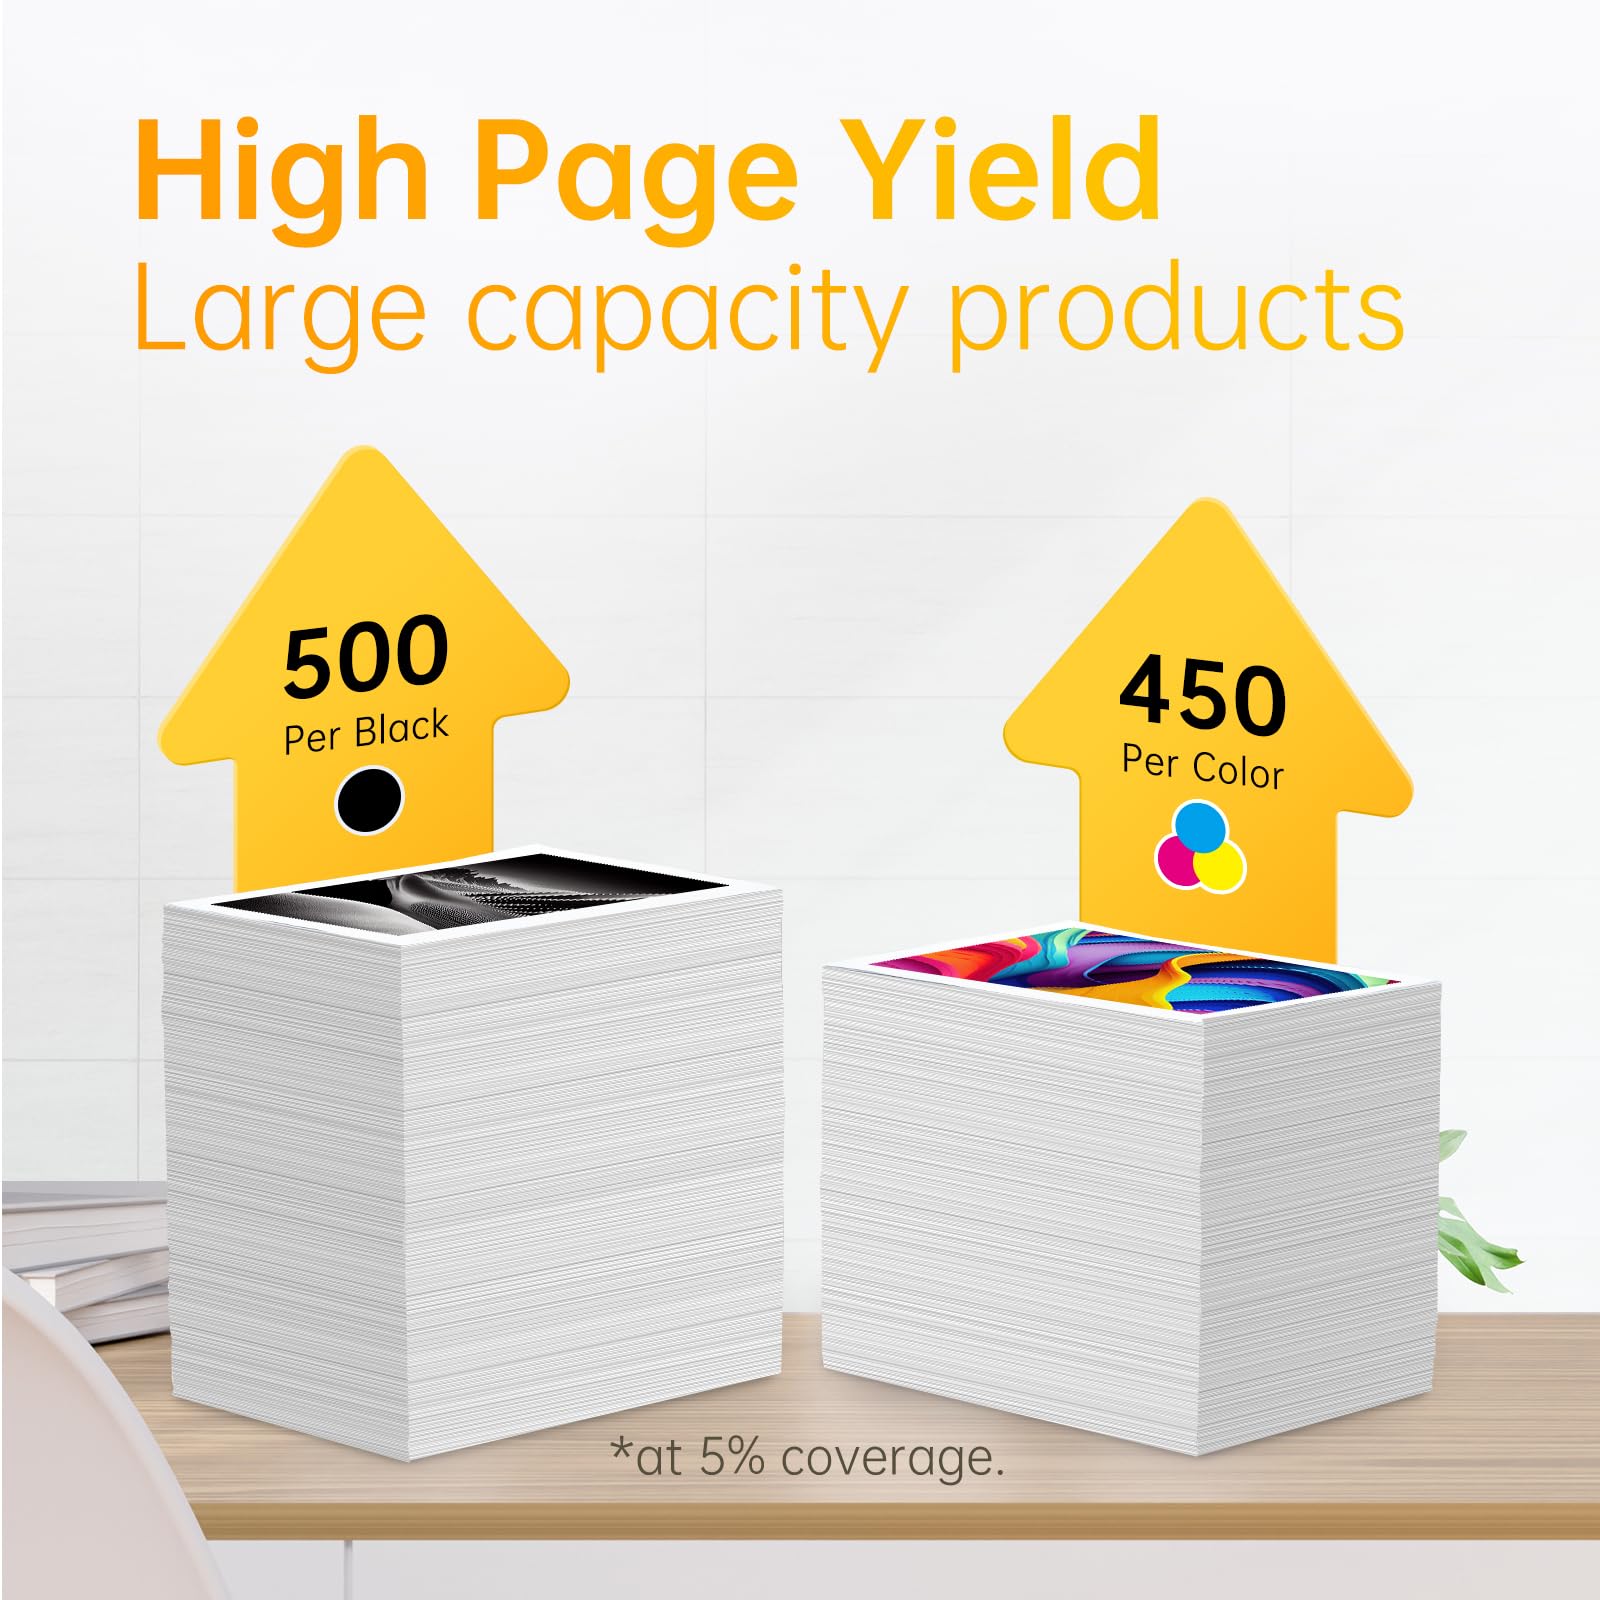 High Page Yield LEMERO 220XL Ink Cartridges Offering 500 Pages per Black and 450 Pages per Color Cartridge